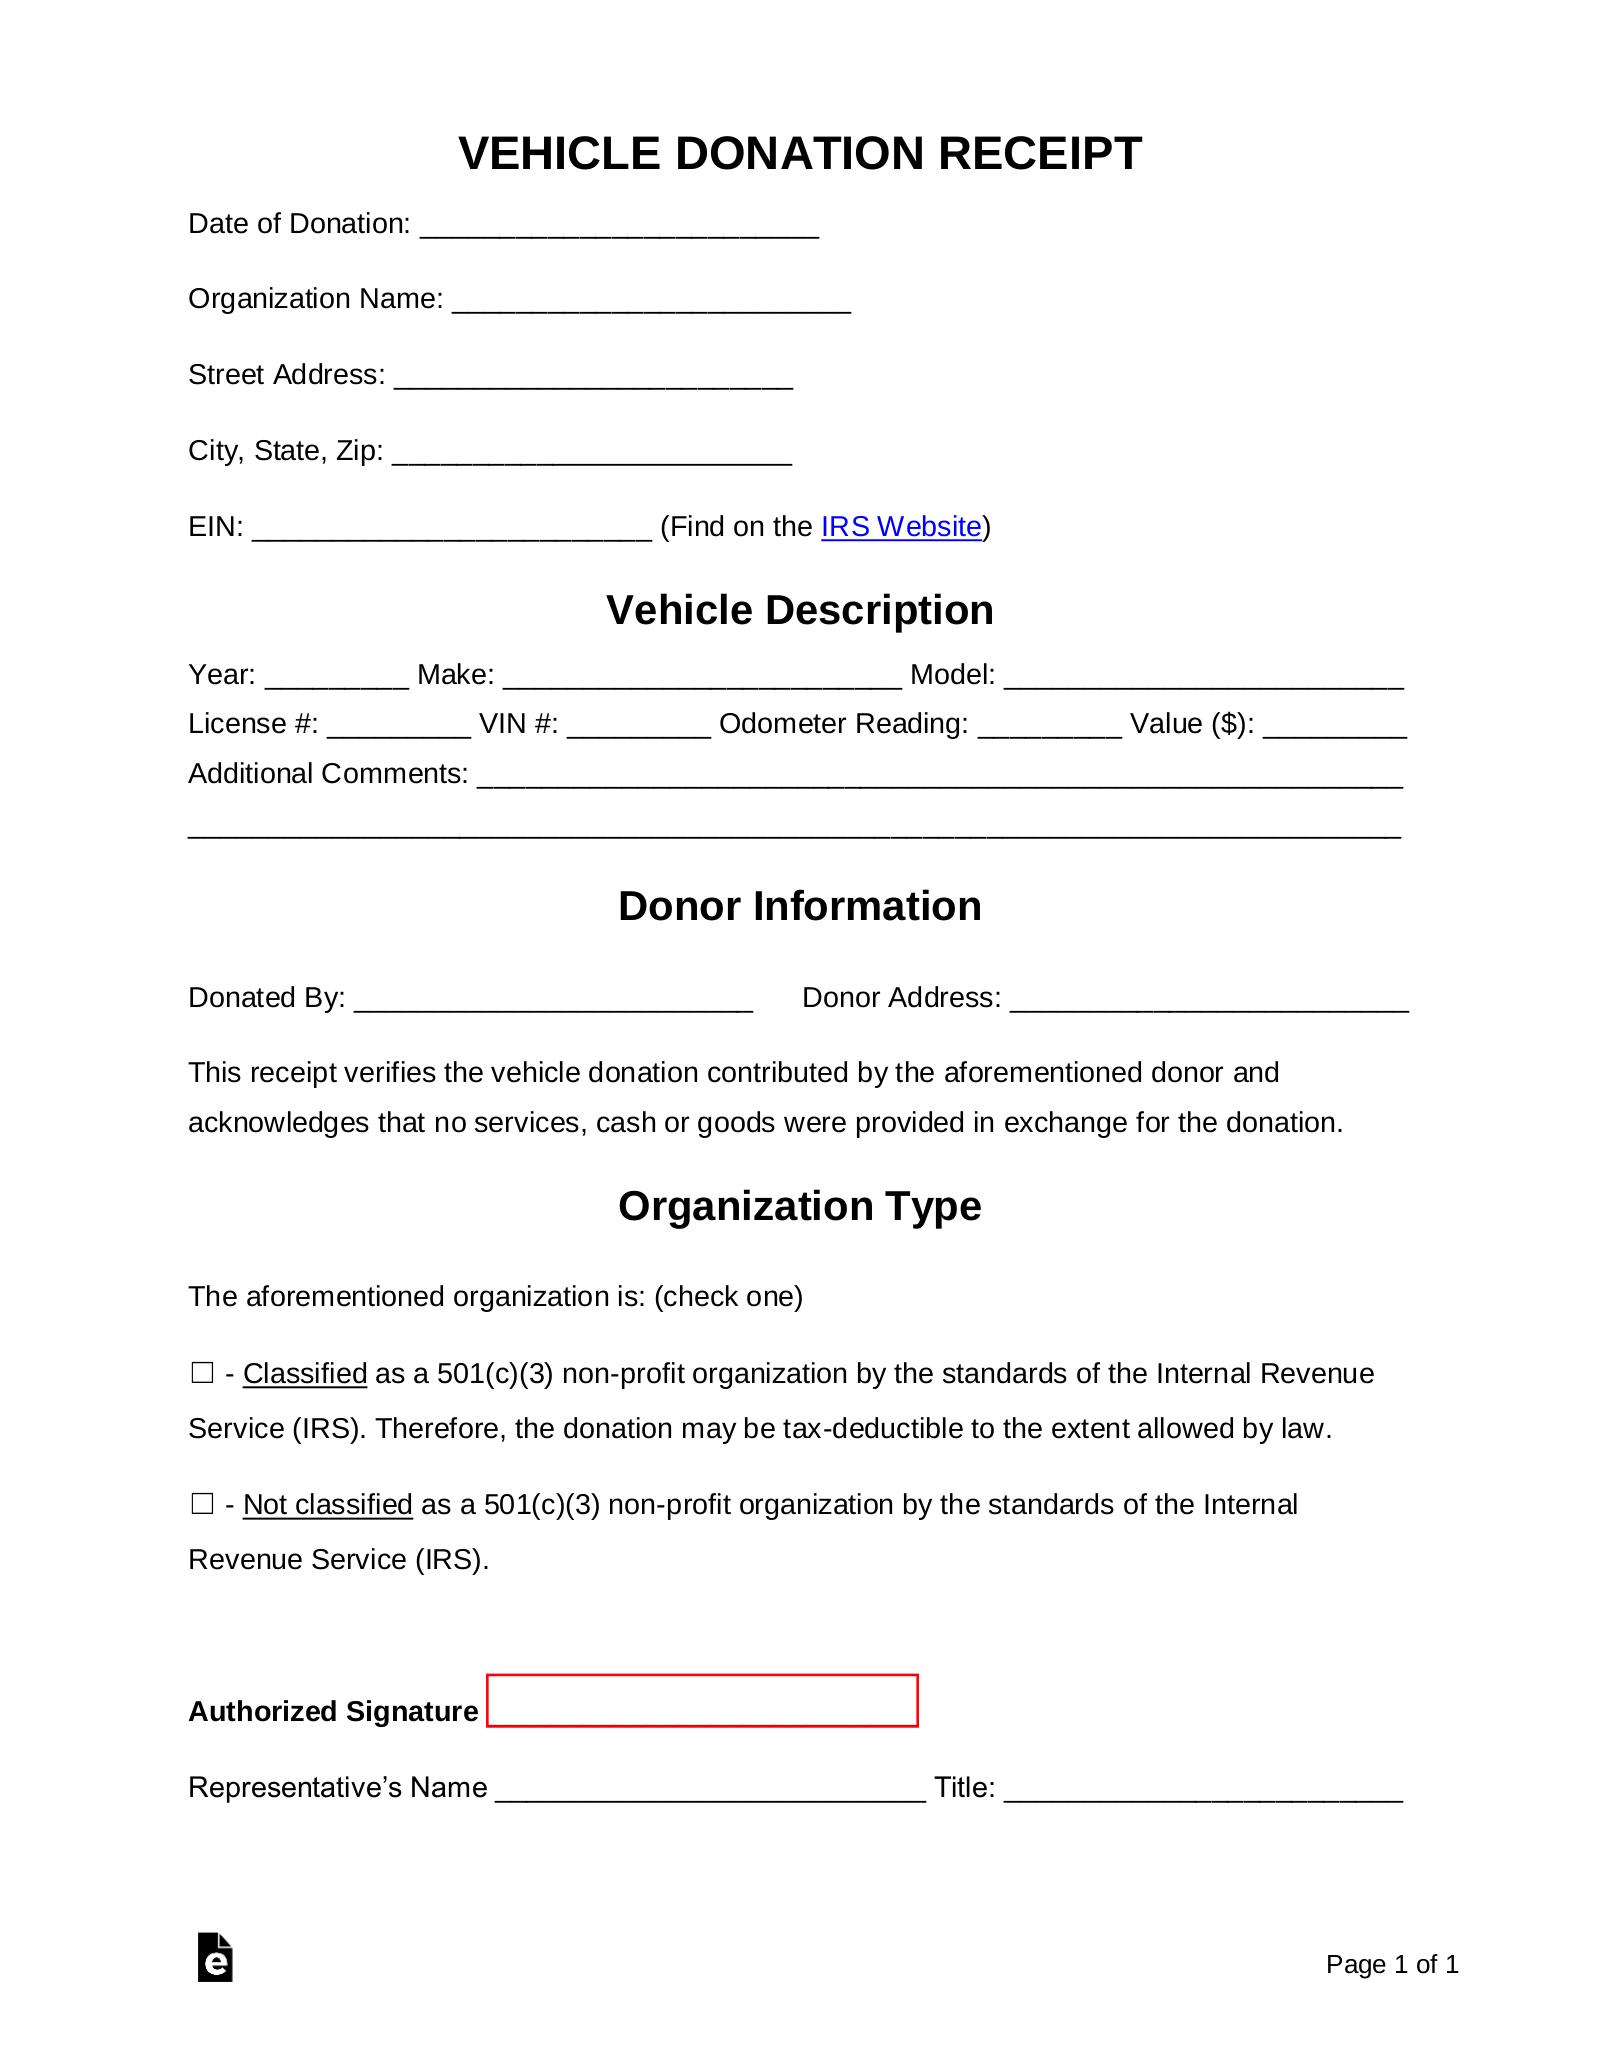 Vehicle Donation Request Letter from eforms.com